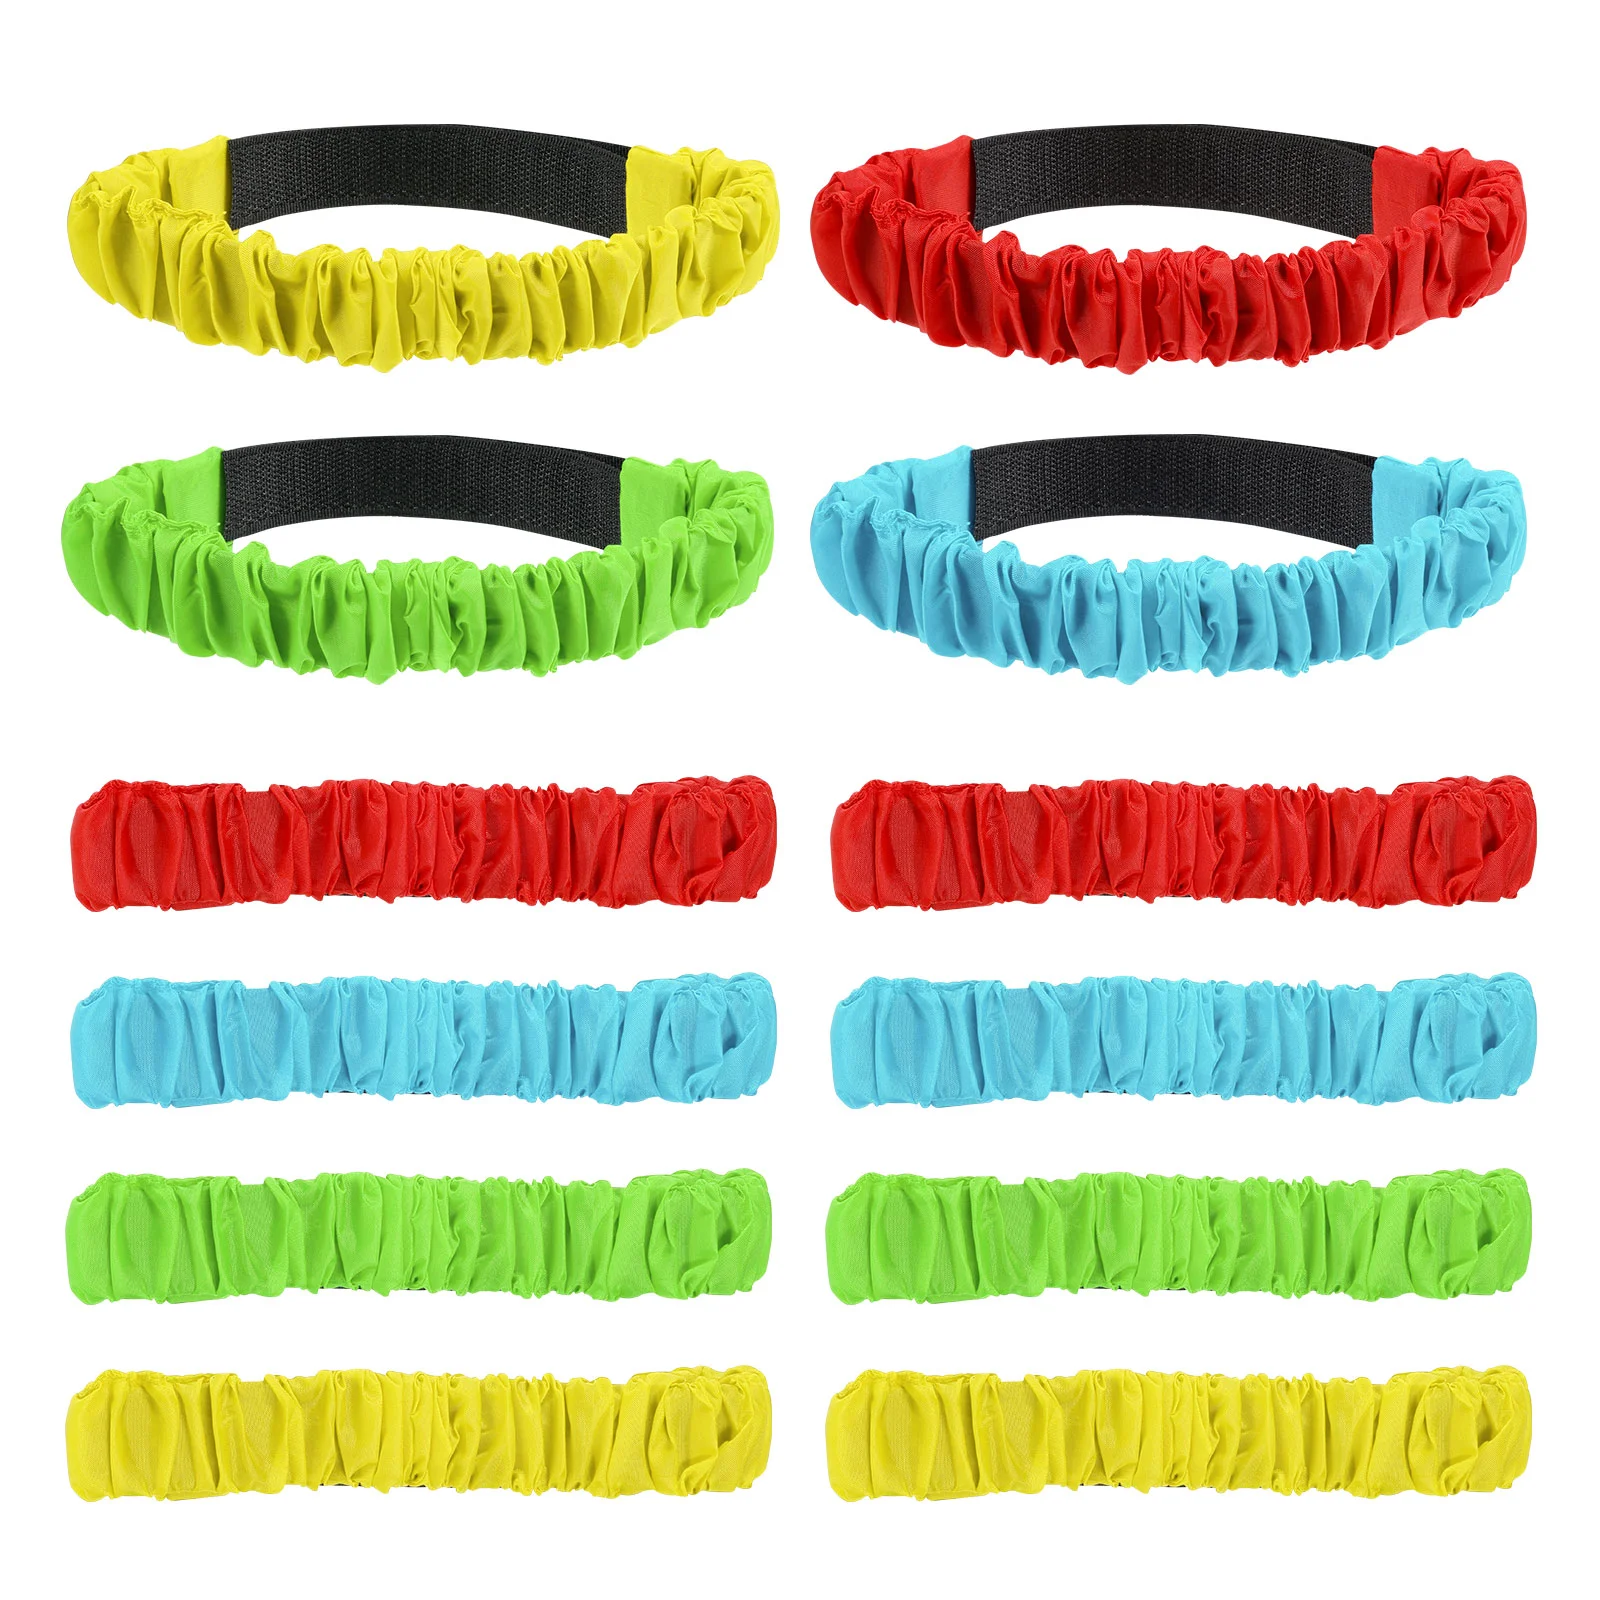 

Race Legged Bands Game Three Elastic Games Band Kids Tie Rope Leg Ties Field Outdoor Party Day Relay Supplies Carnival Straps Or